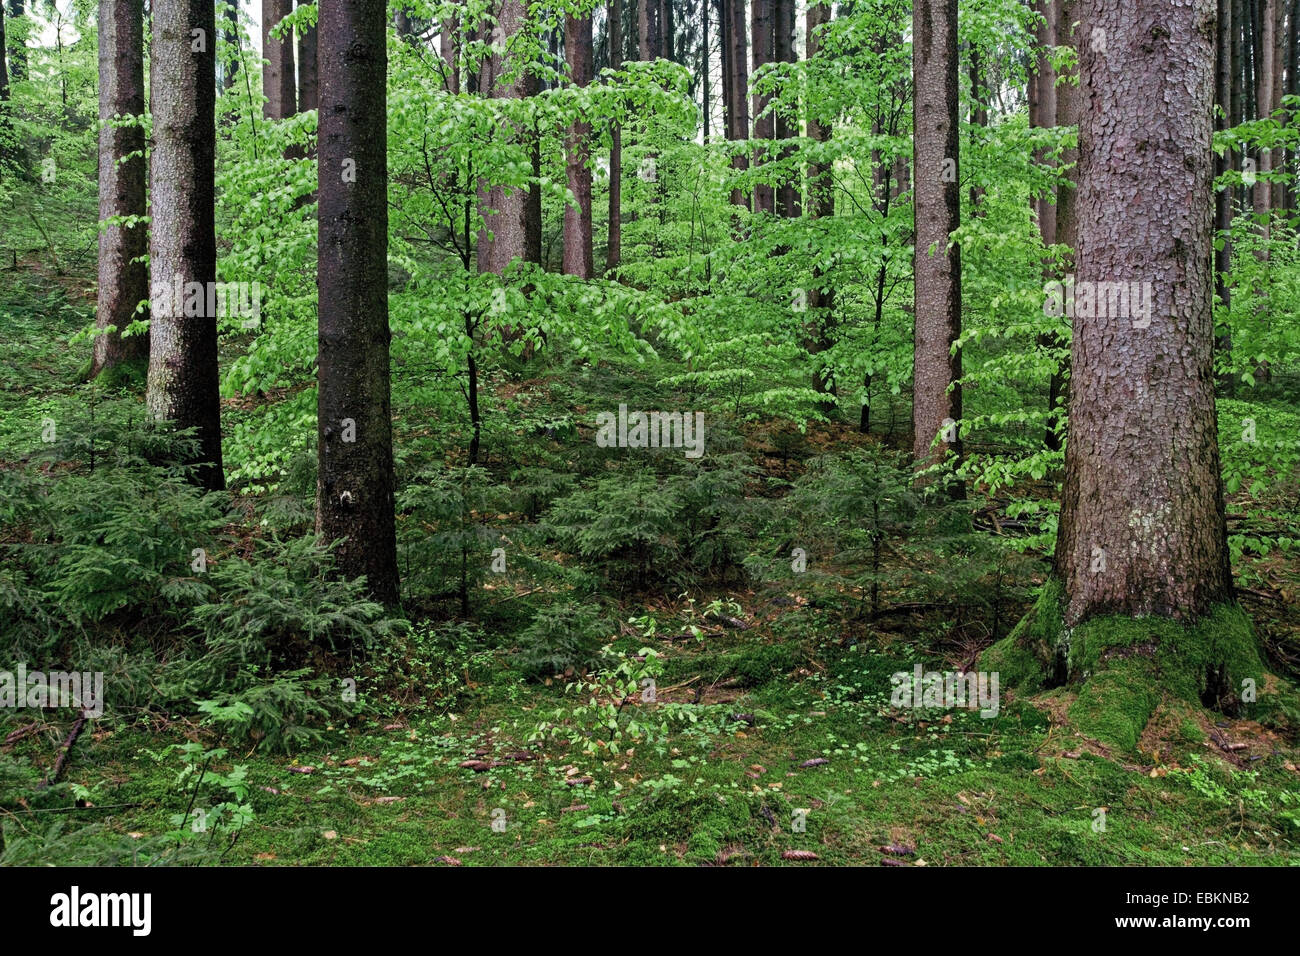 Norway spruce (Picea abies), spruce forest with beeches, Germany, Bavaria, Oberbayern, Upper Bavaria Stock Photo